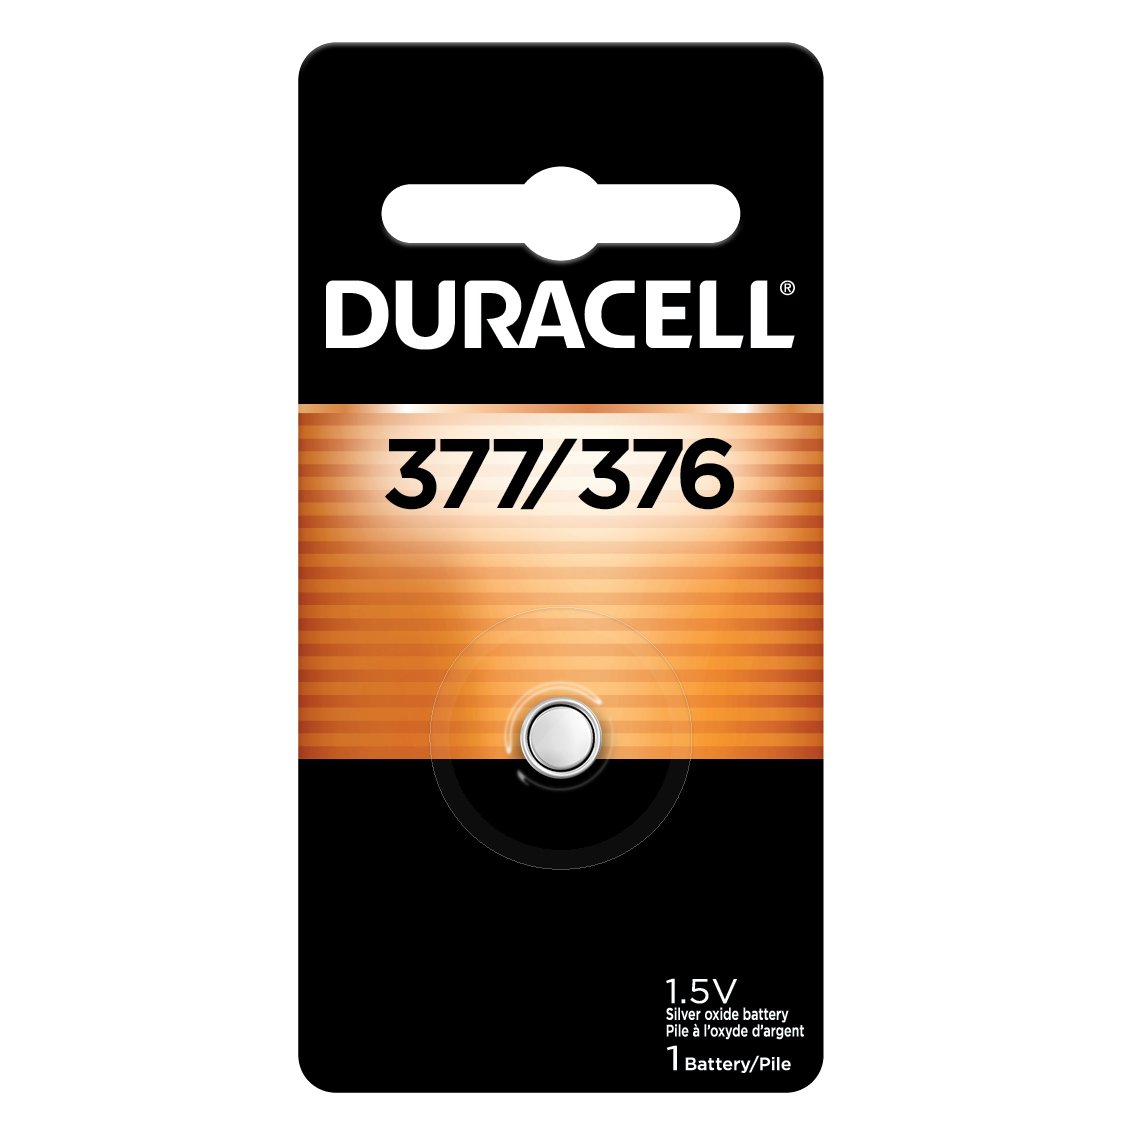 Duracell 376/377 Silver Oxide Battery